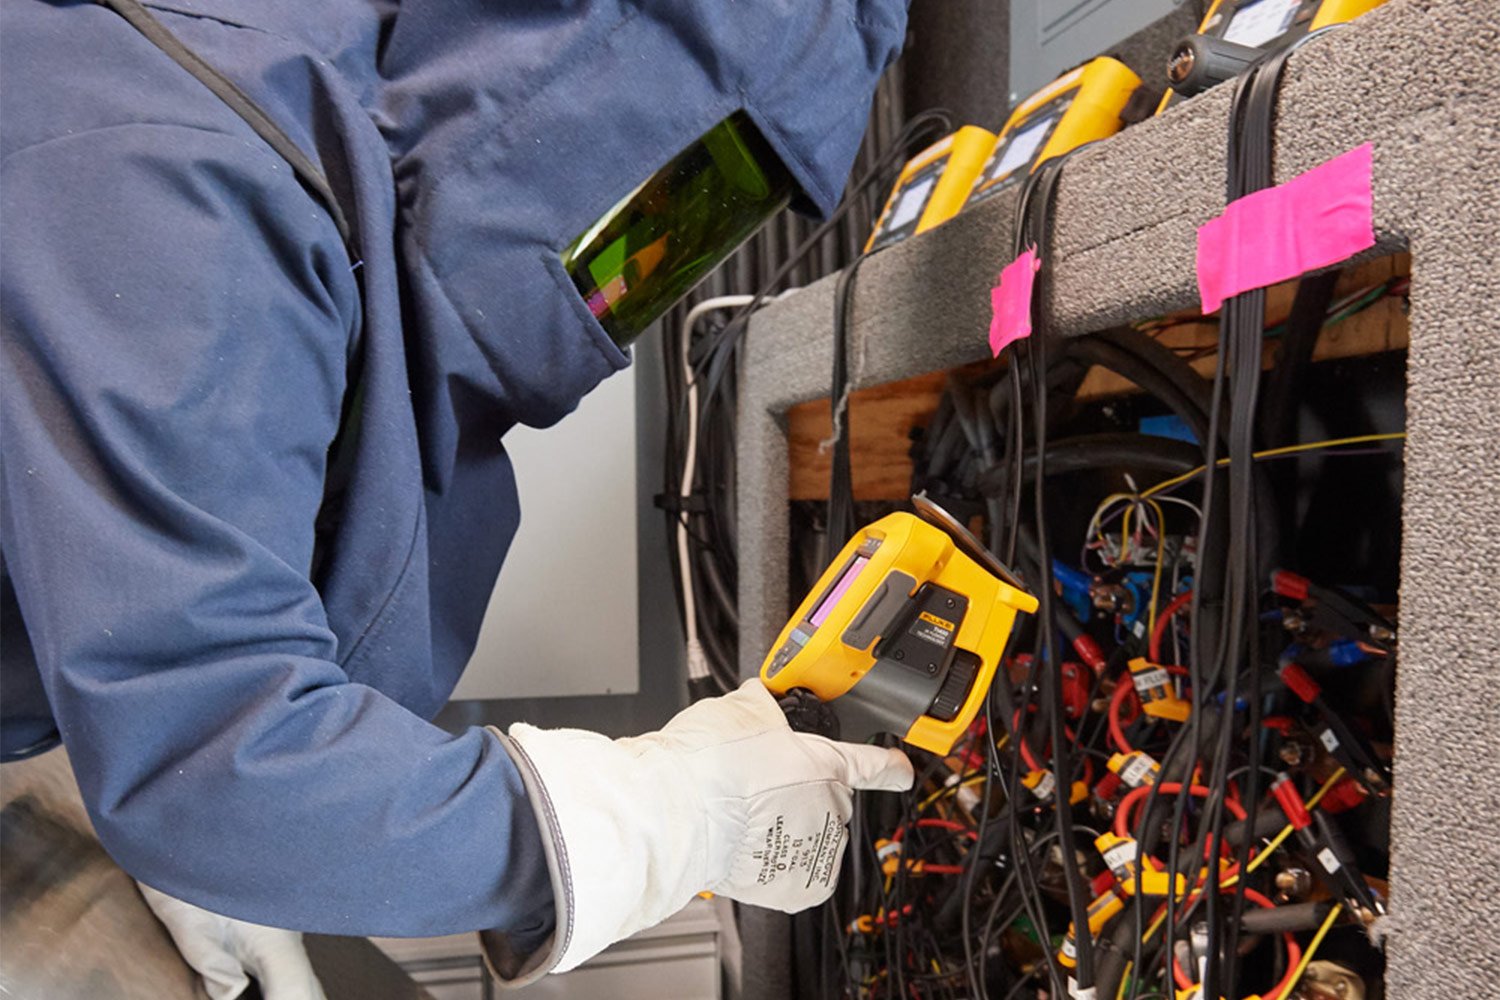 Keep systems running safely and efficiently with infrared inspections